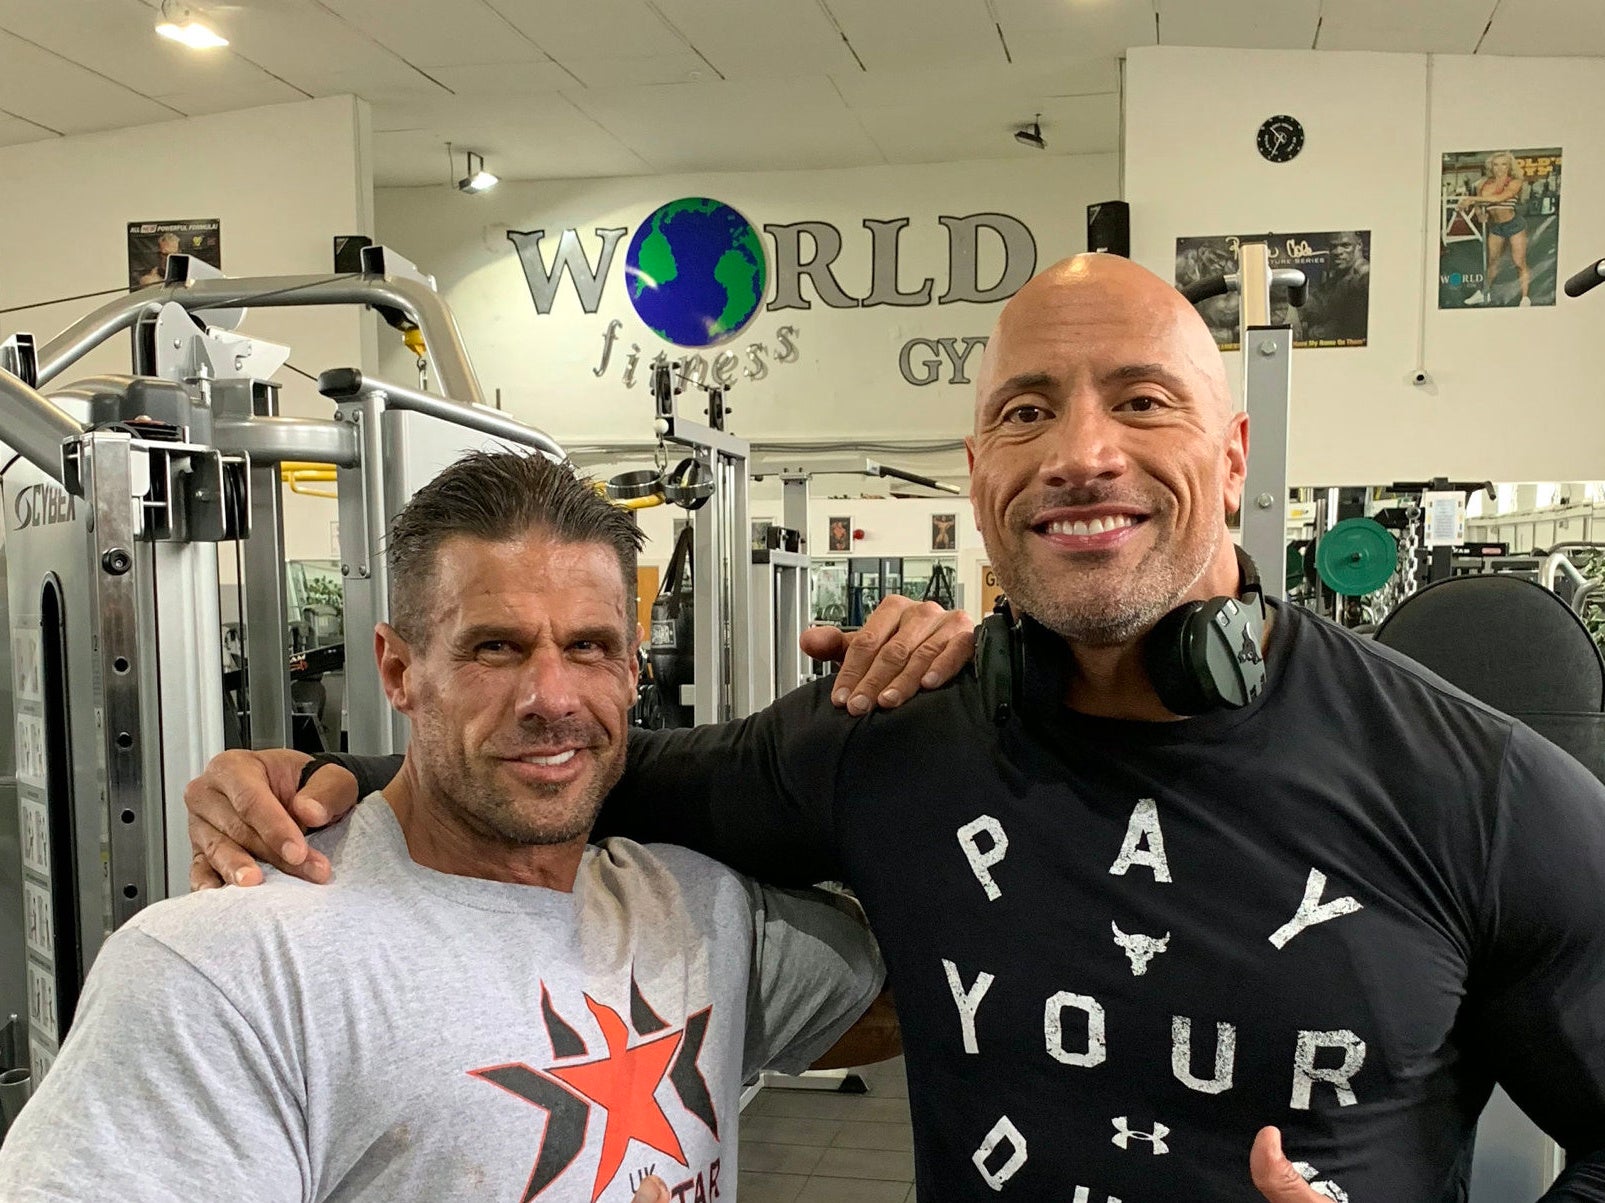 Dwayne 'The Rock' Johnson posing with Craie Carrera, owner of World Fitness Gym in Doncaster